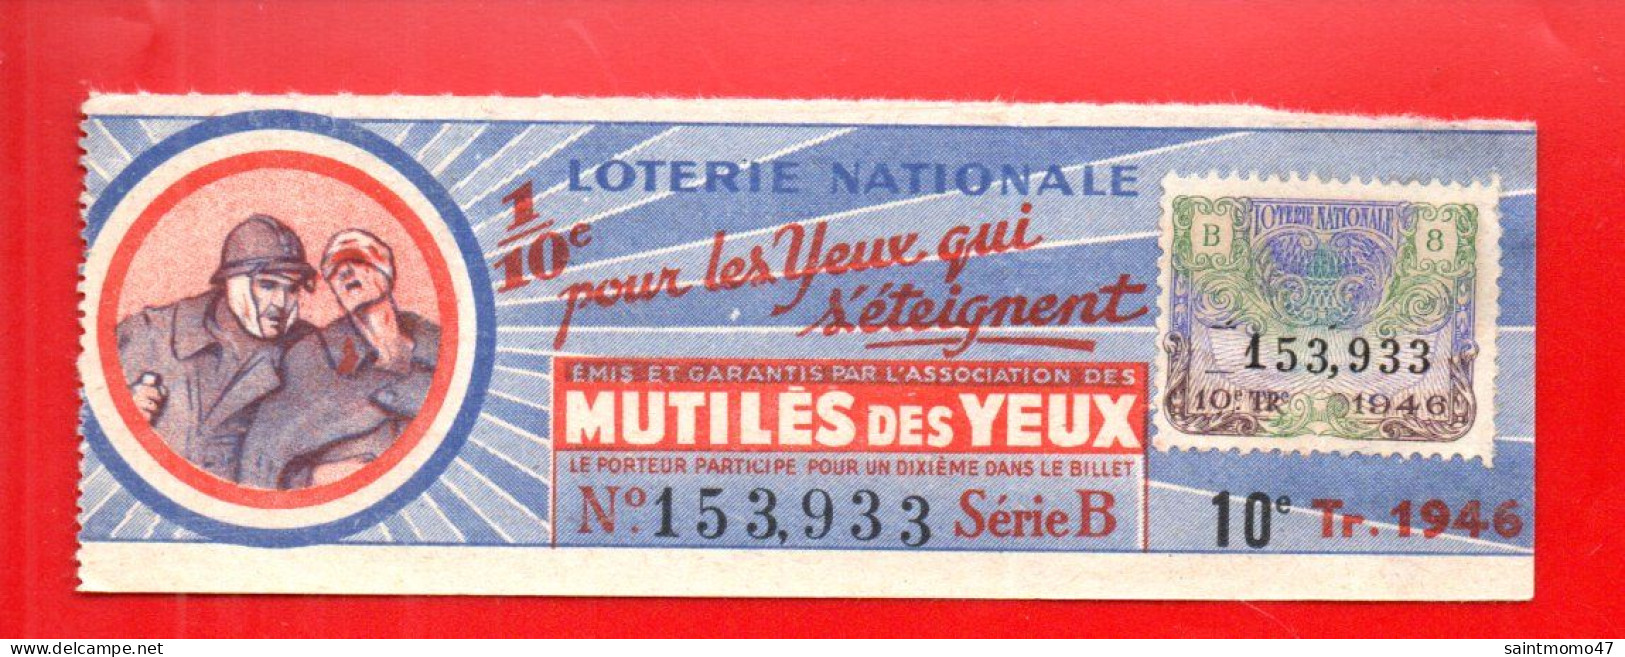 FRANCE . LOTERIE NATIONALE . " MUTILÉS DES YEUX " . 1946 - Ref. N°13017 - - Lottery Tickets